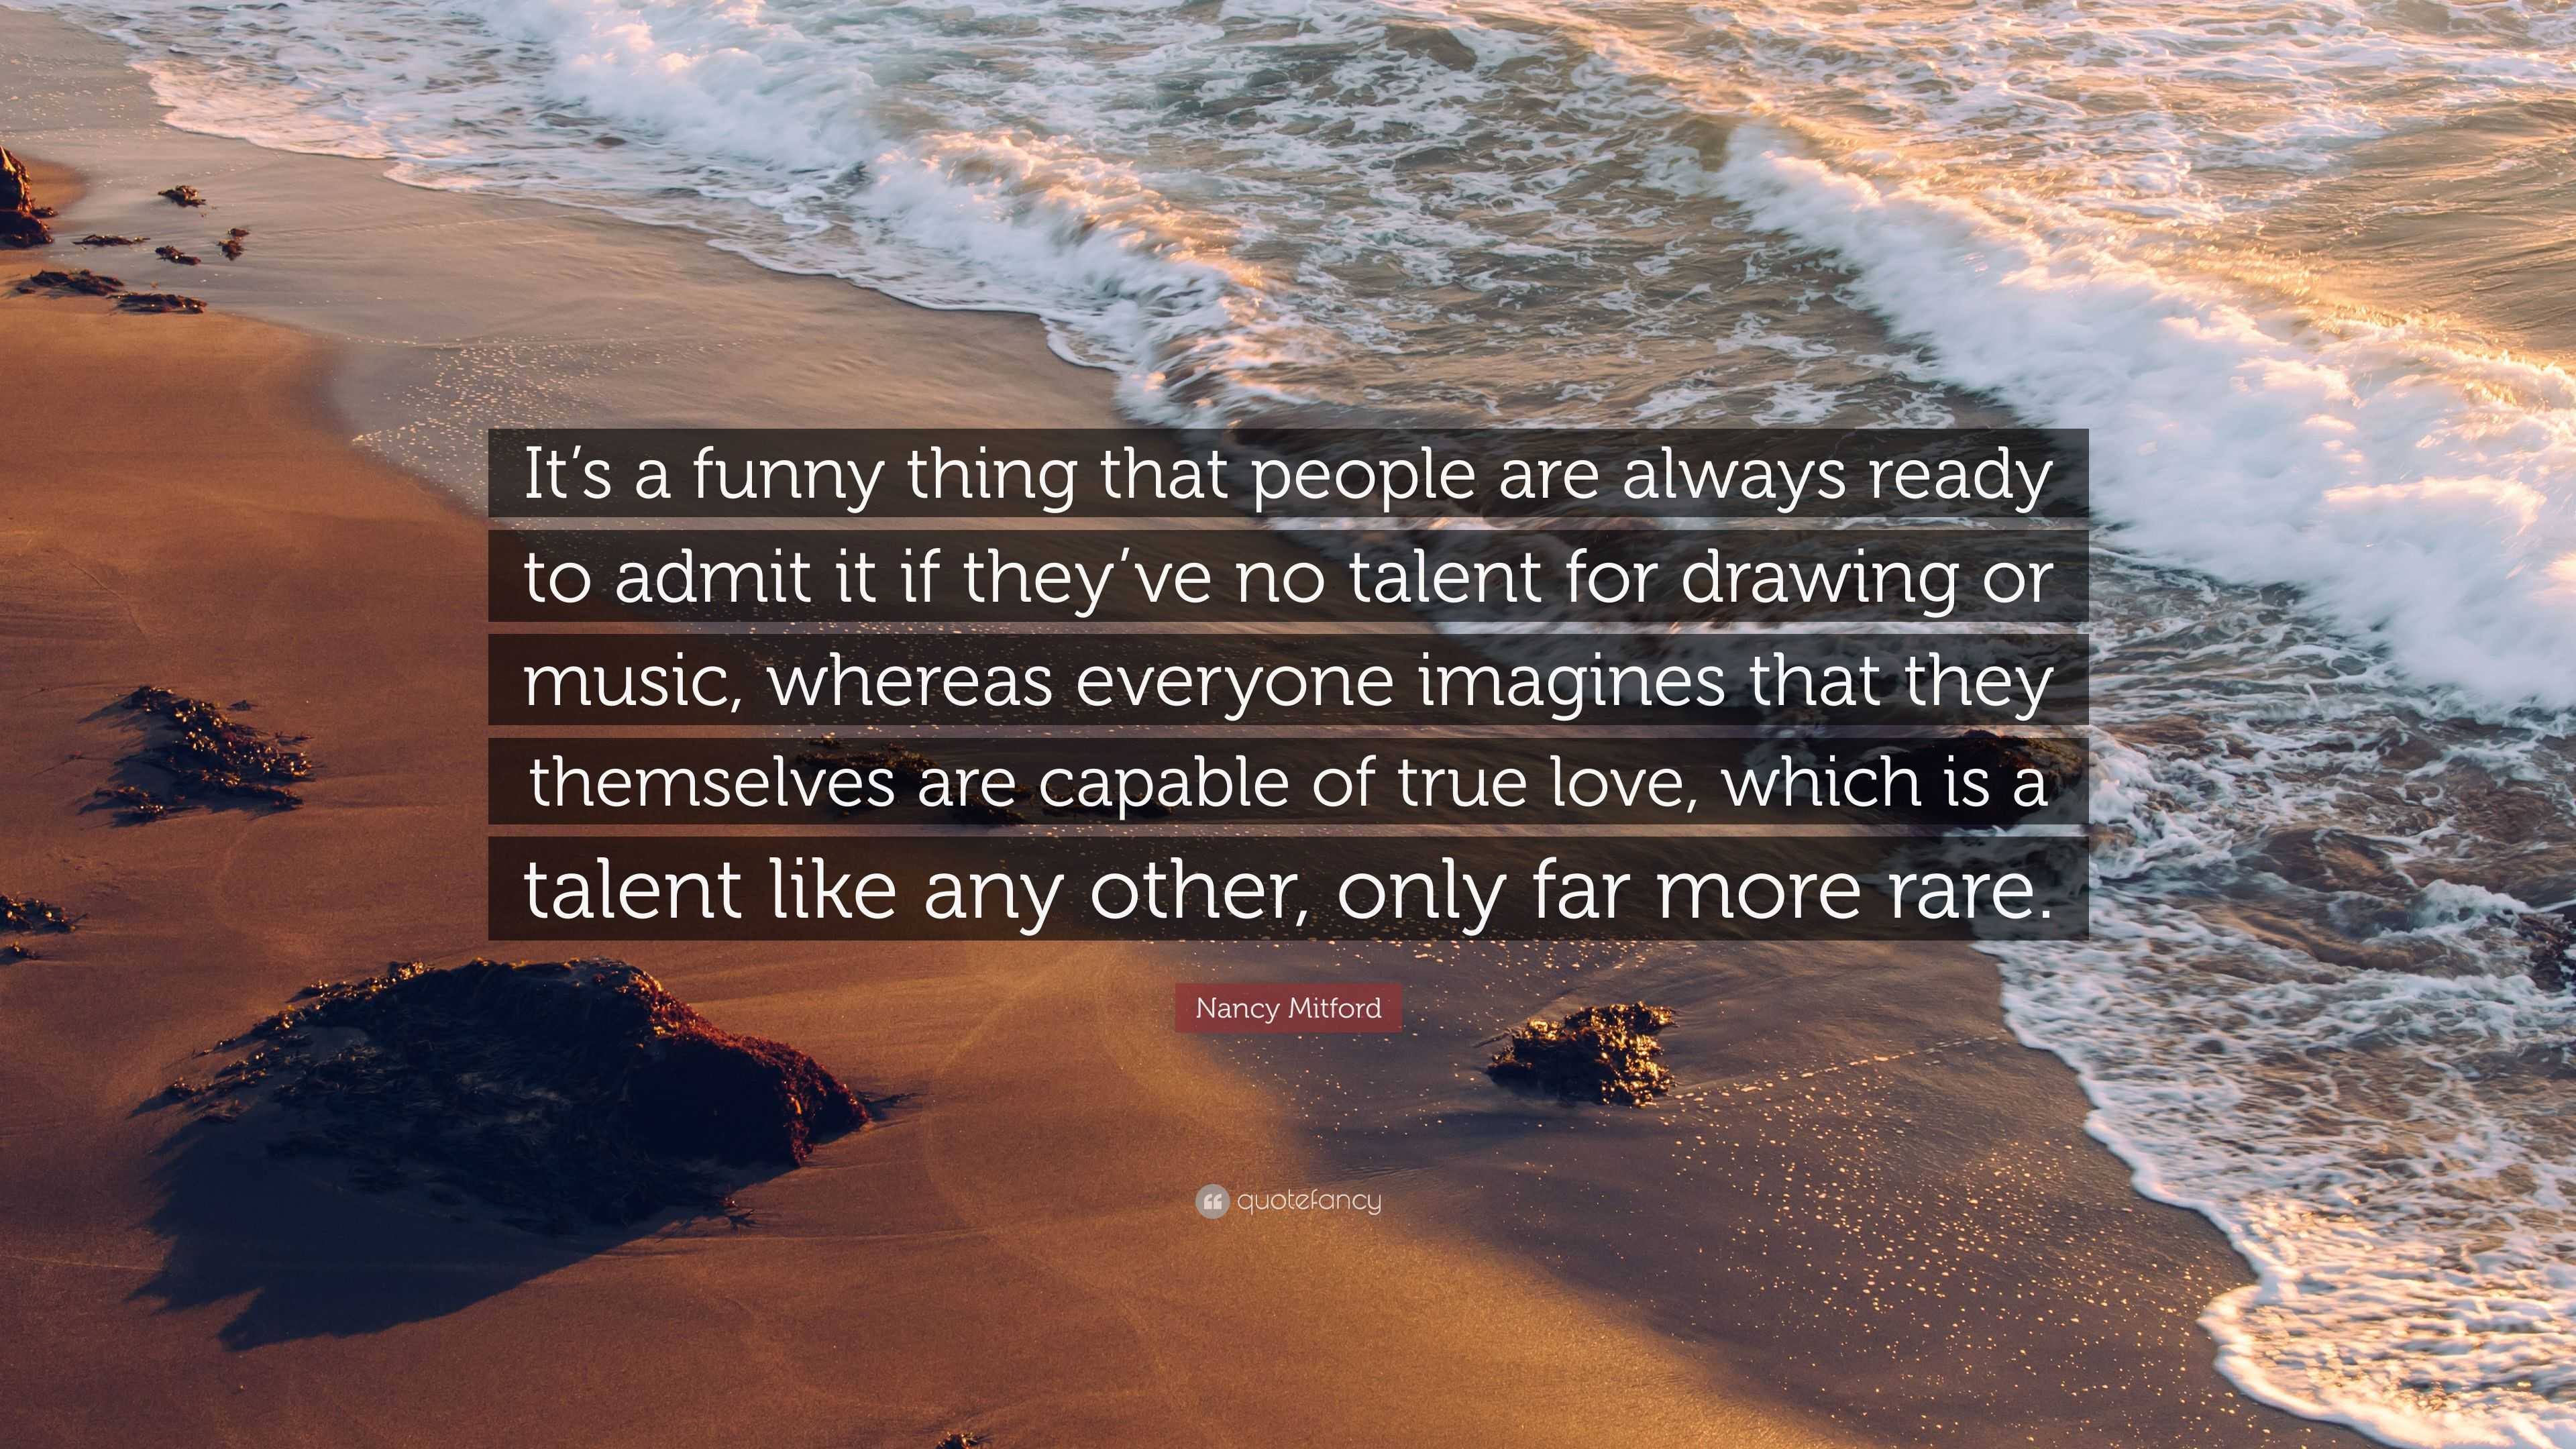 Nancy Mitford Quote: “It's a funny thing that people are always ready to  admit it if they've no talent for drawing or music, whereas everyone ...”